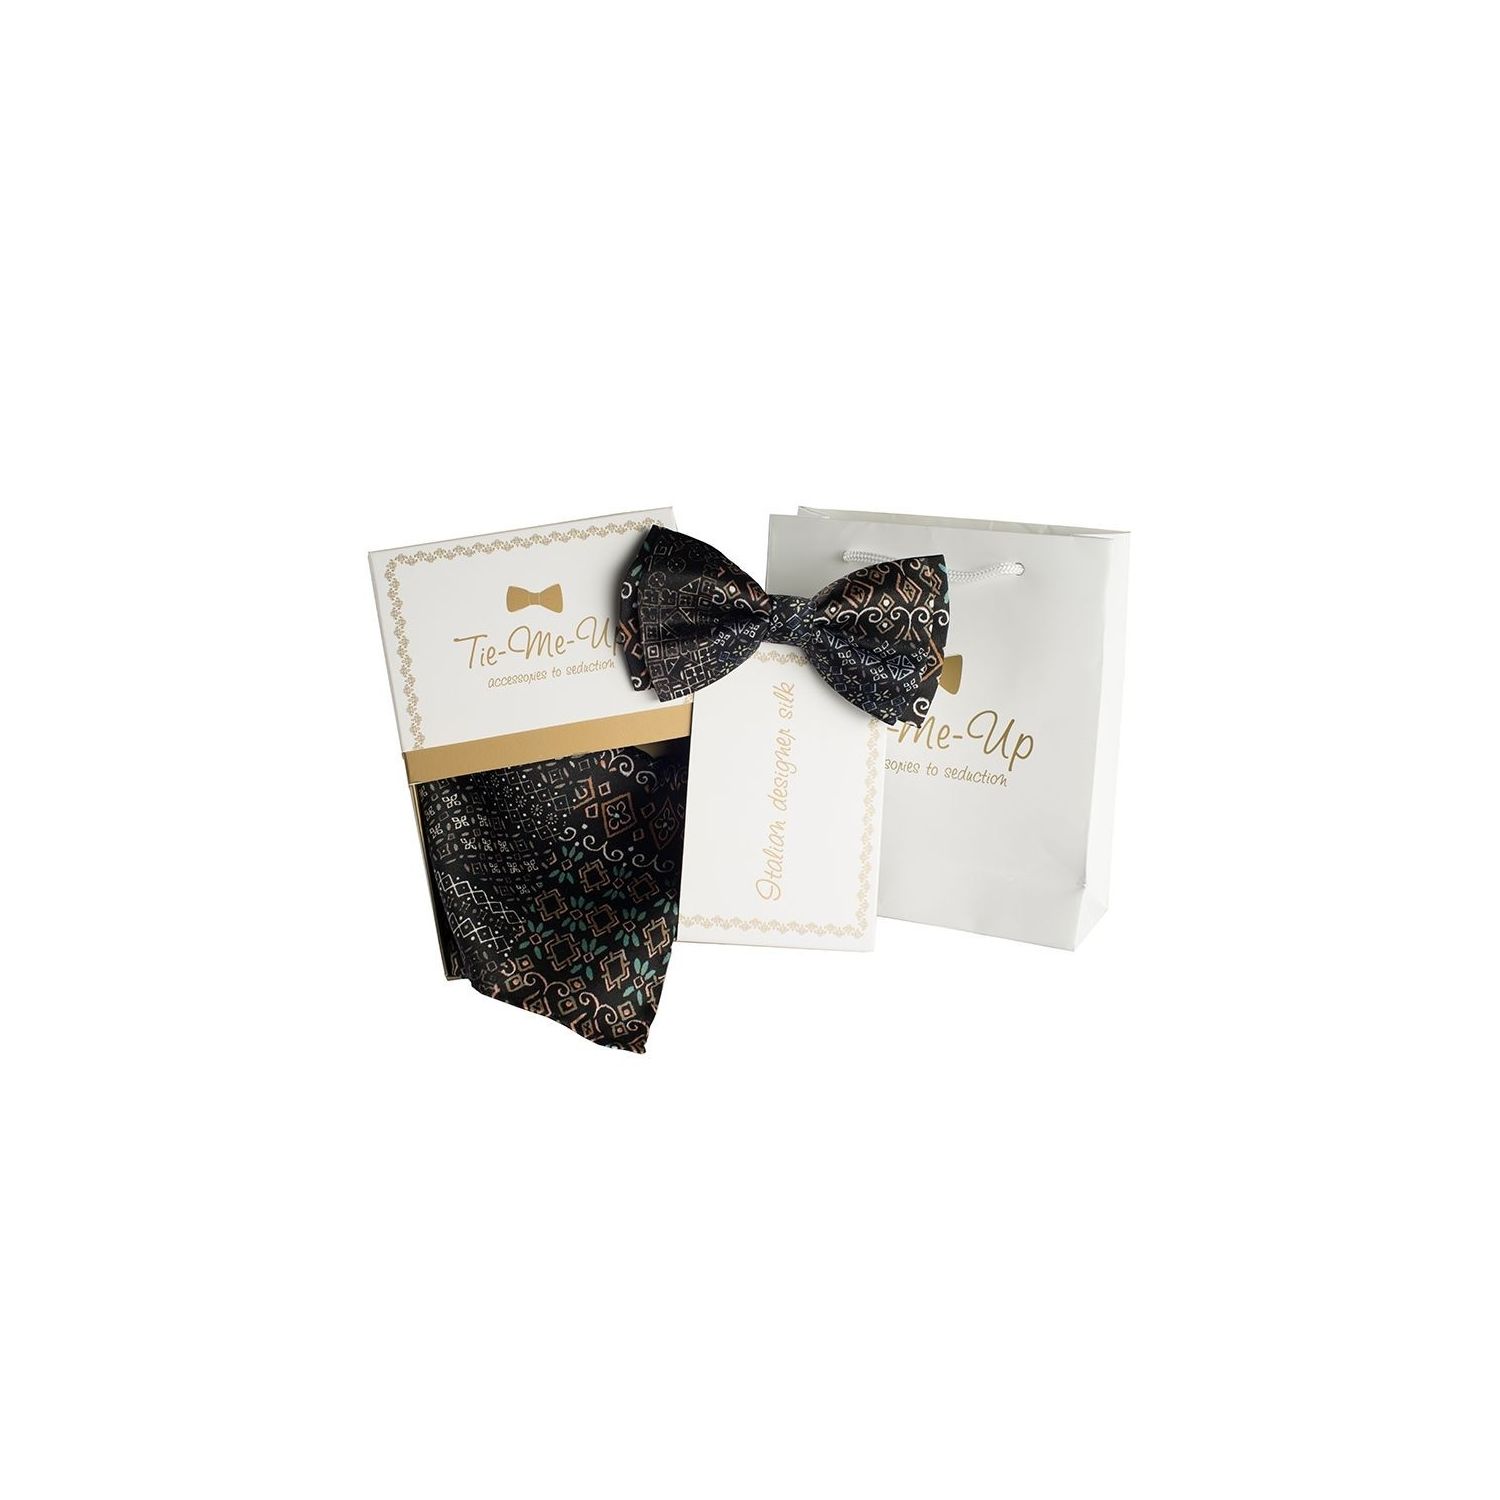 Luxury gifts for men: natural silk bowtie and handkerchief etno black